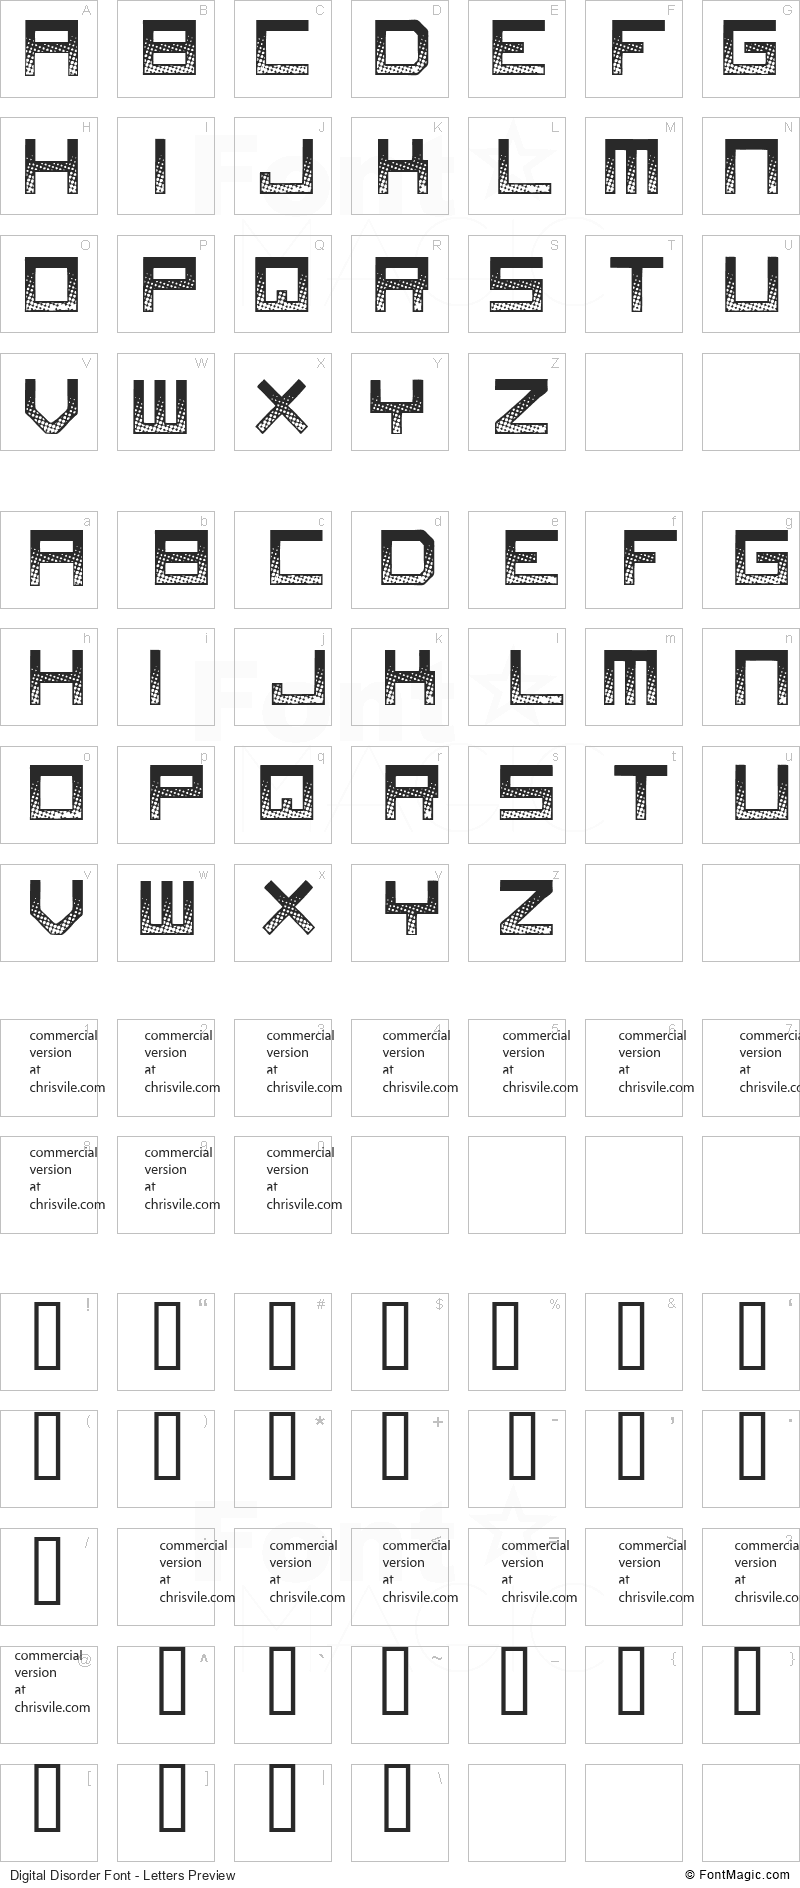 Digital Disorder Font - All Latters Preview Chart